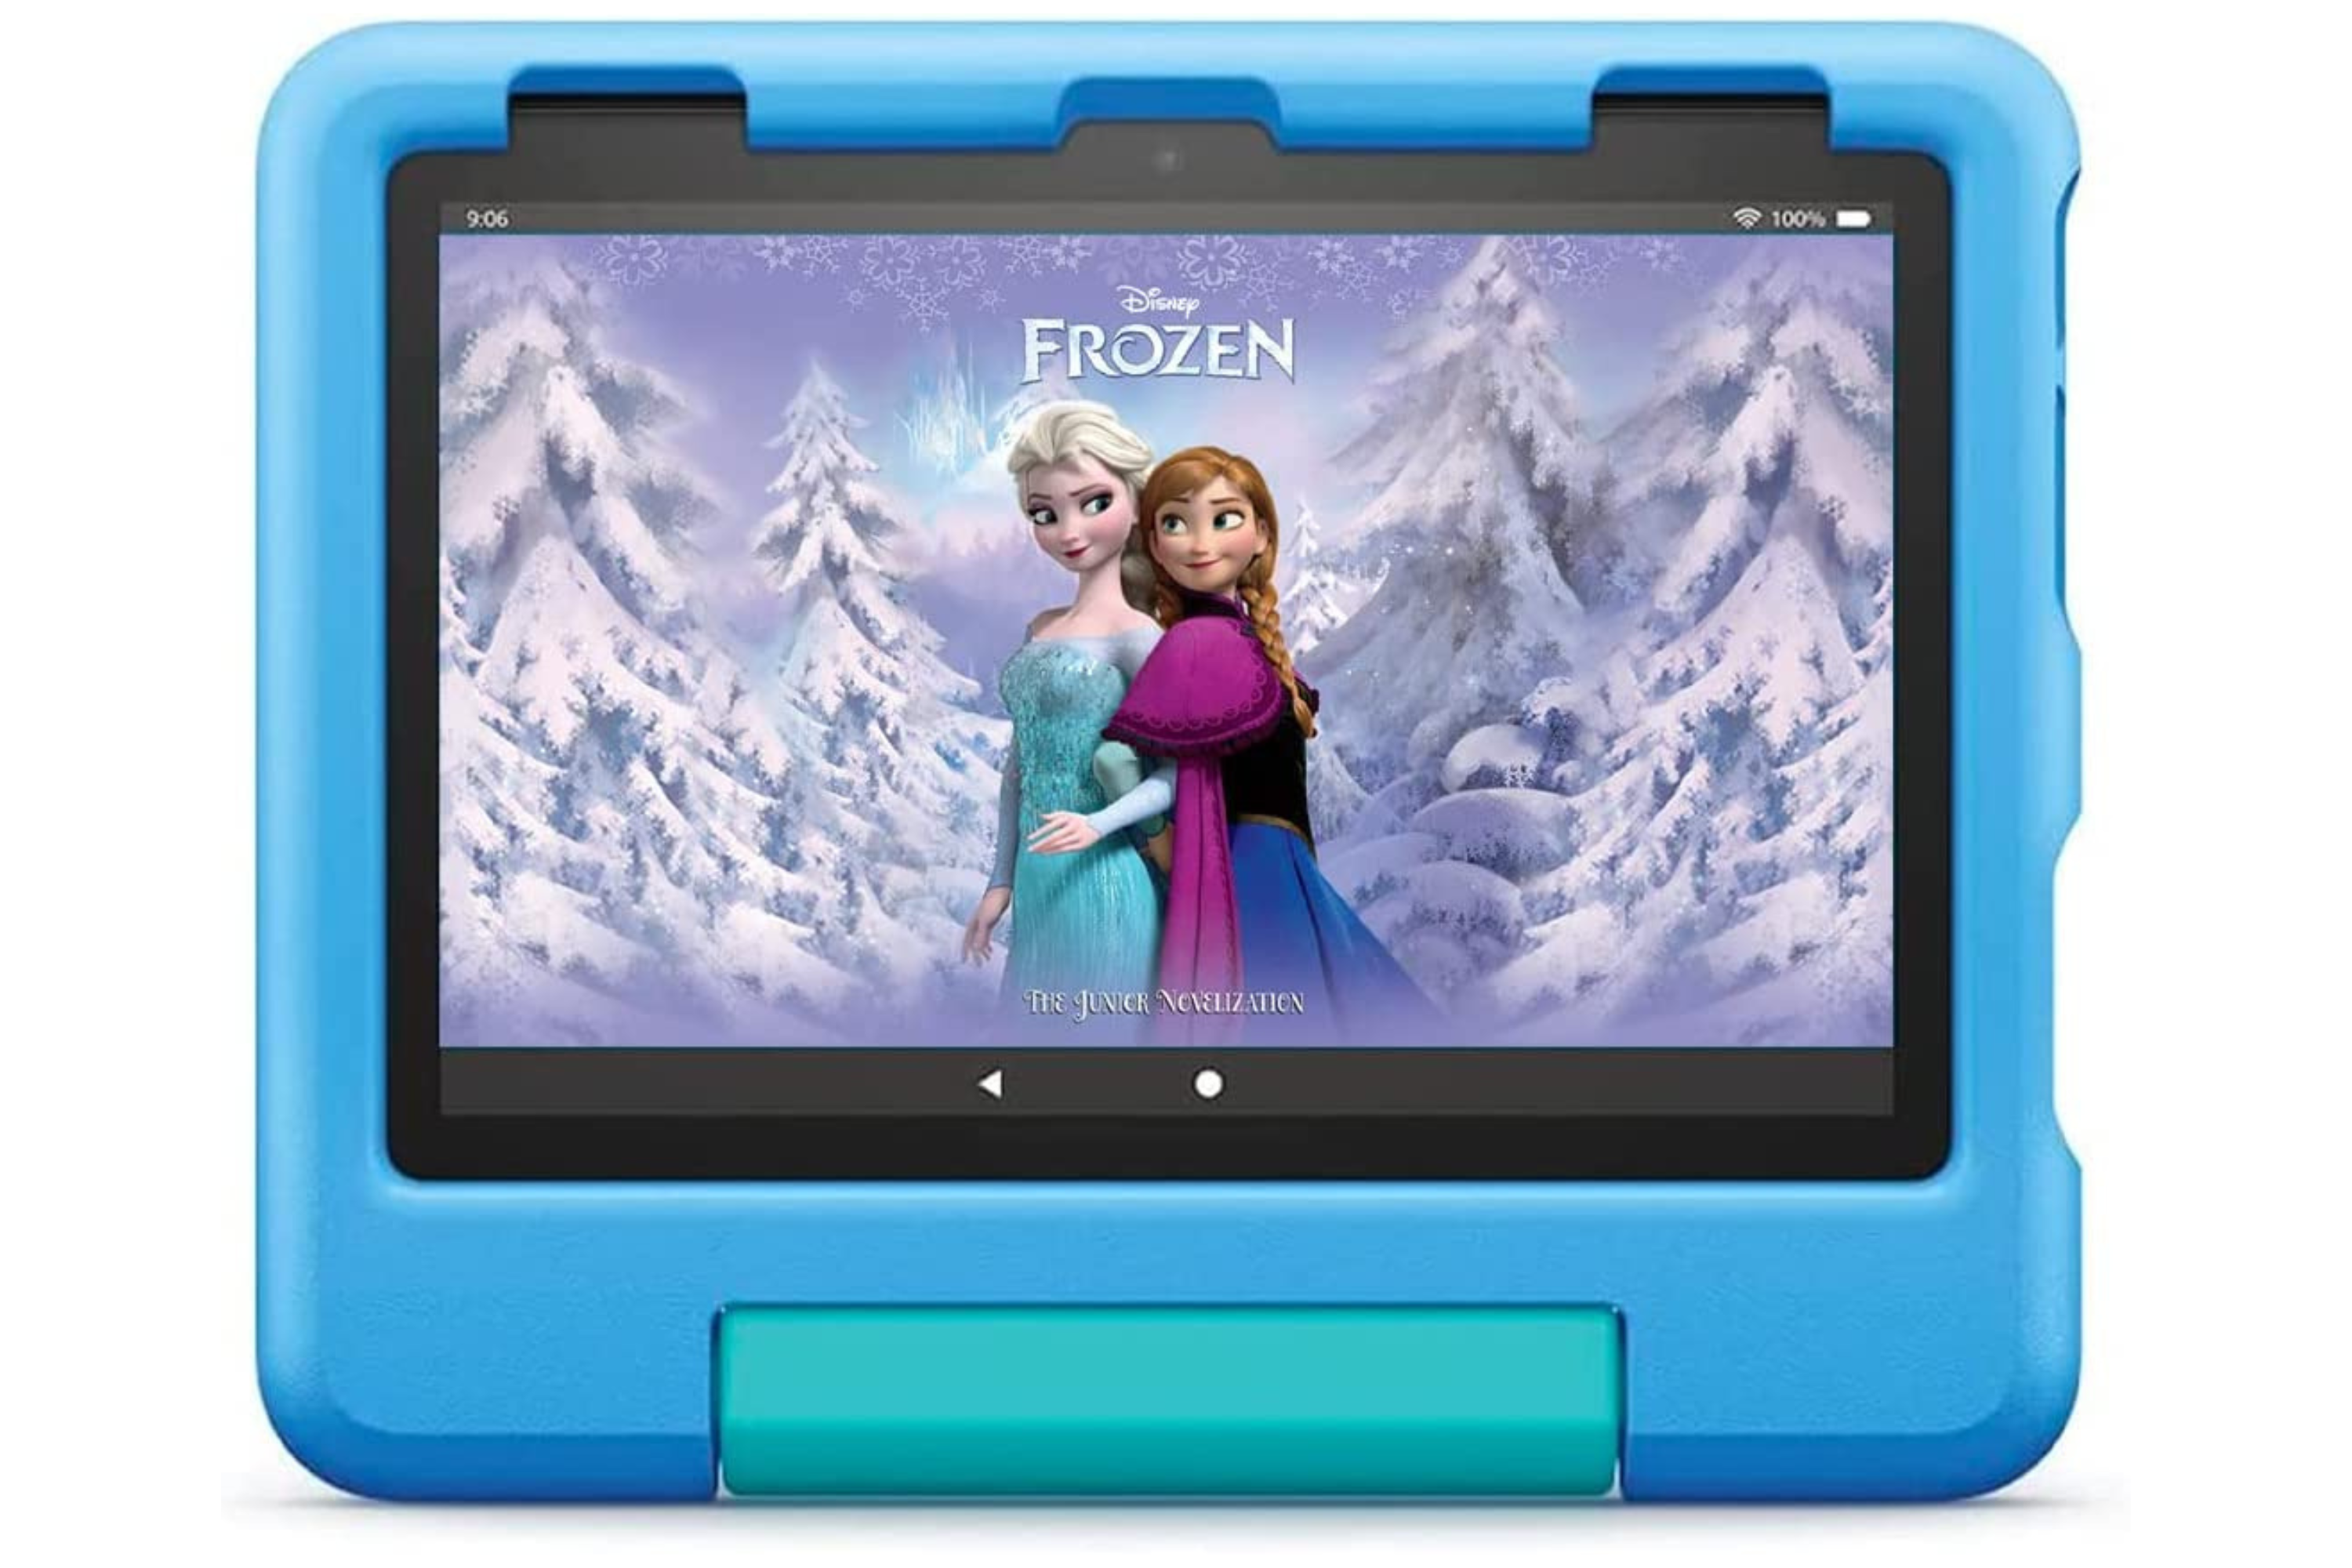 Amazon Fire HD 8 Kids tablet with Frozen animation movie on the screen 